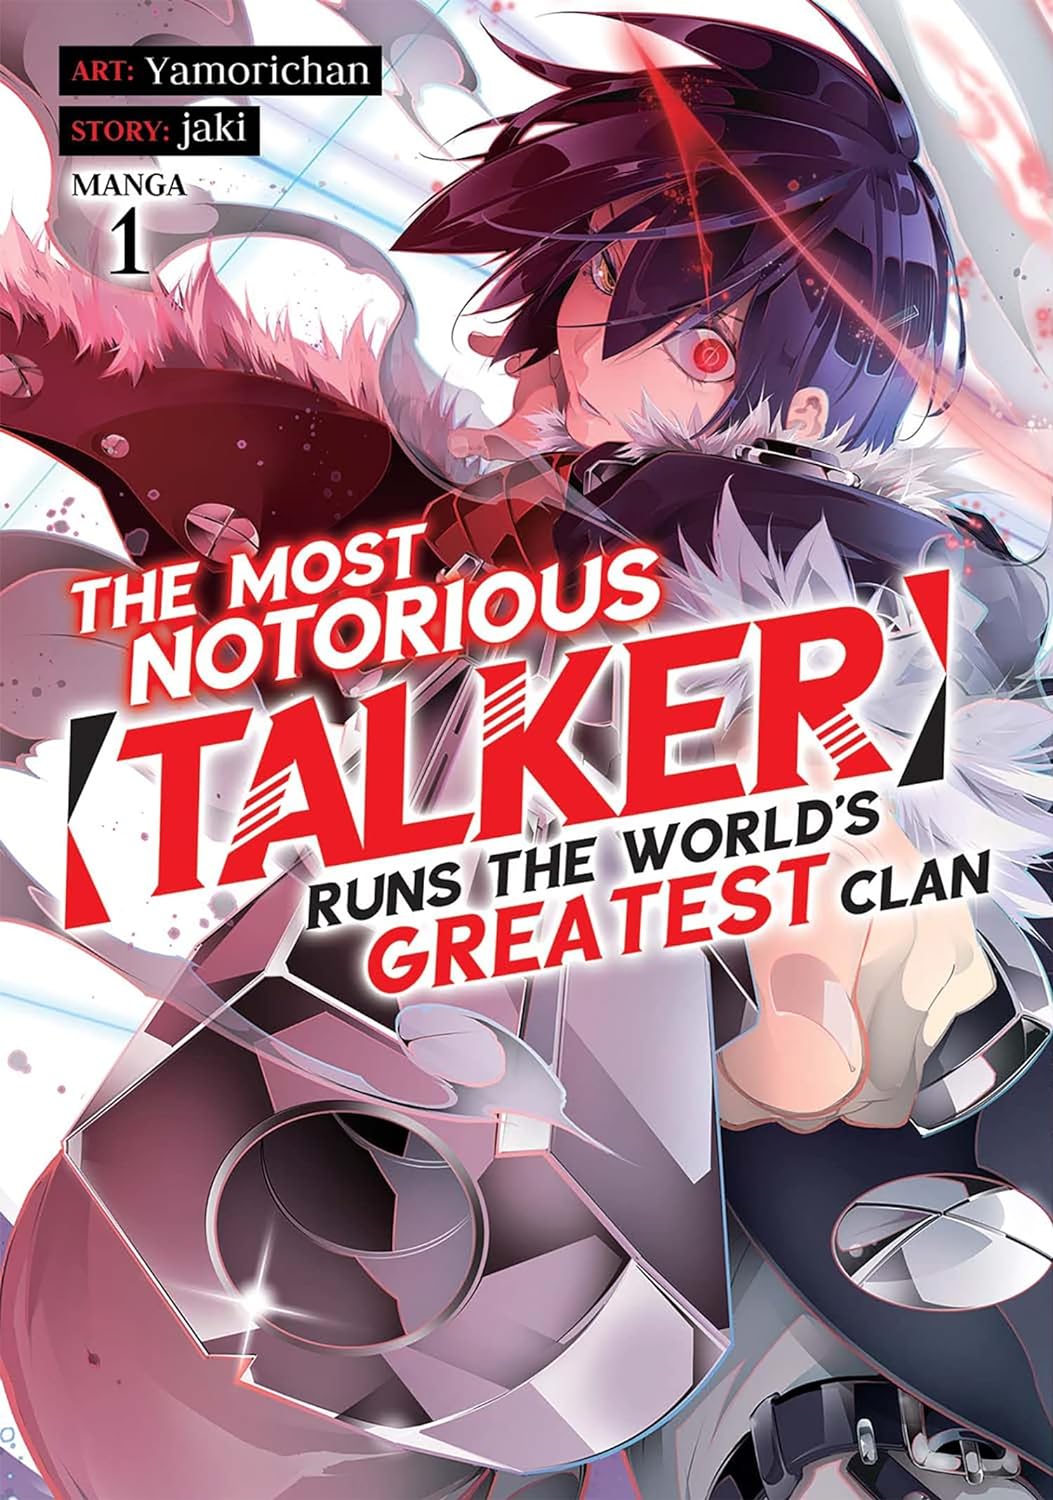 The Most Notorious Talker Runs the World's Greatest Clan (Manga)